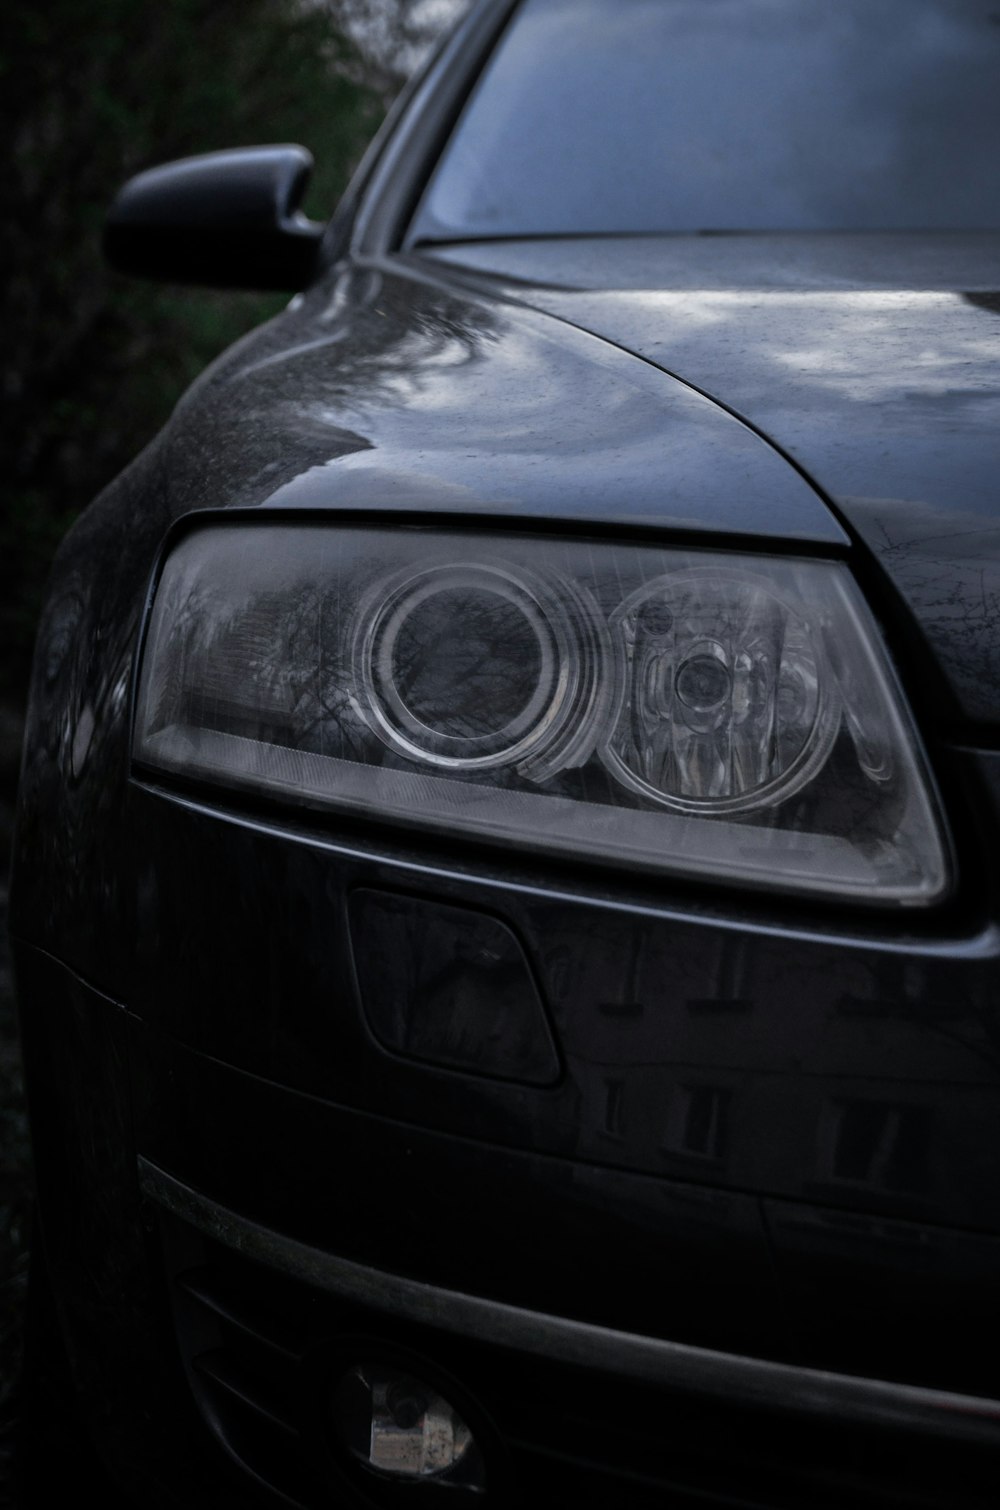 a close up of a car's headlight with trees in the background